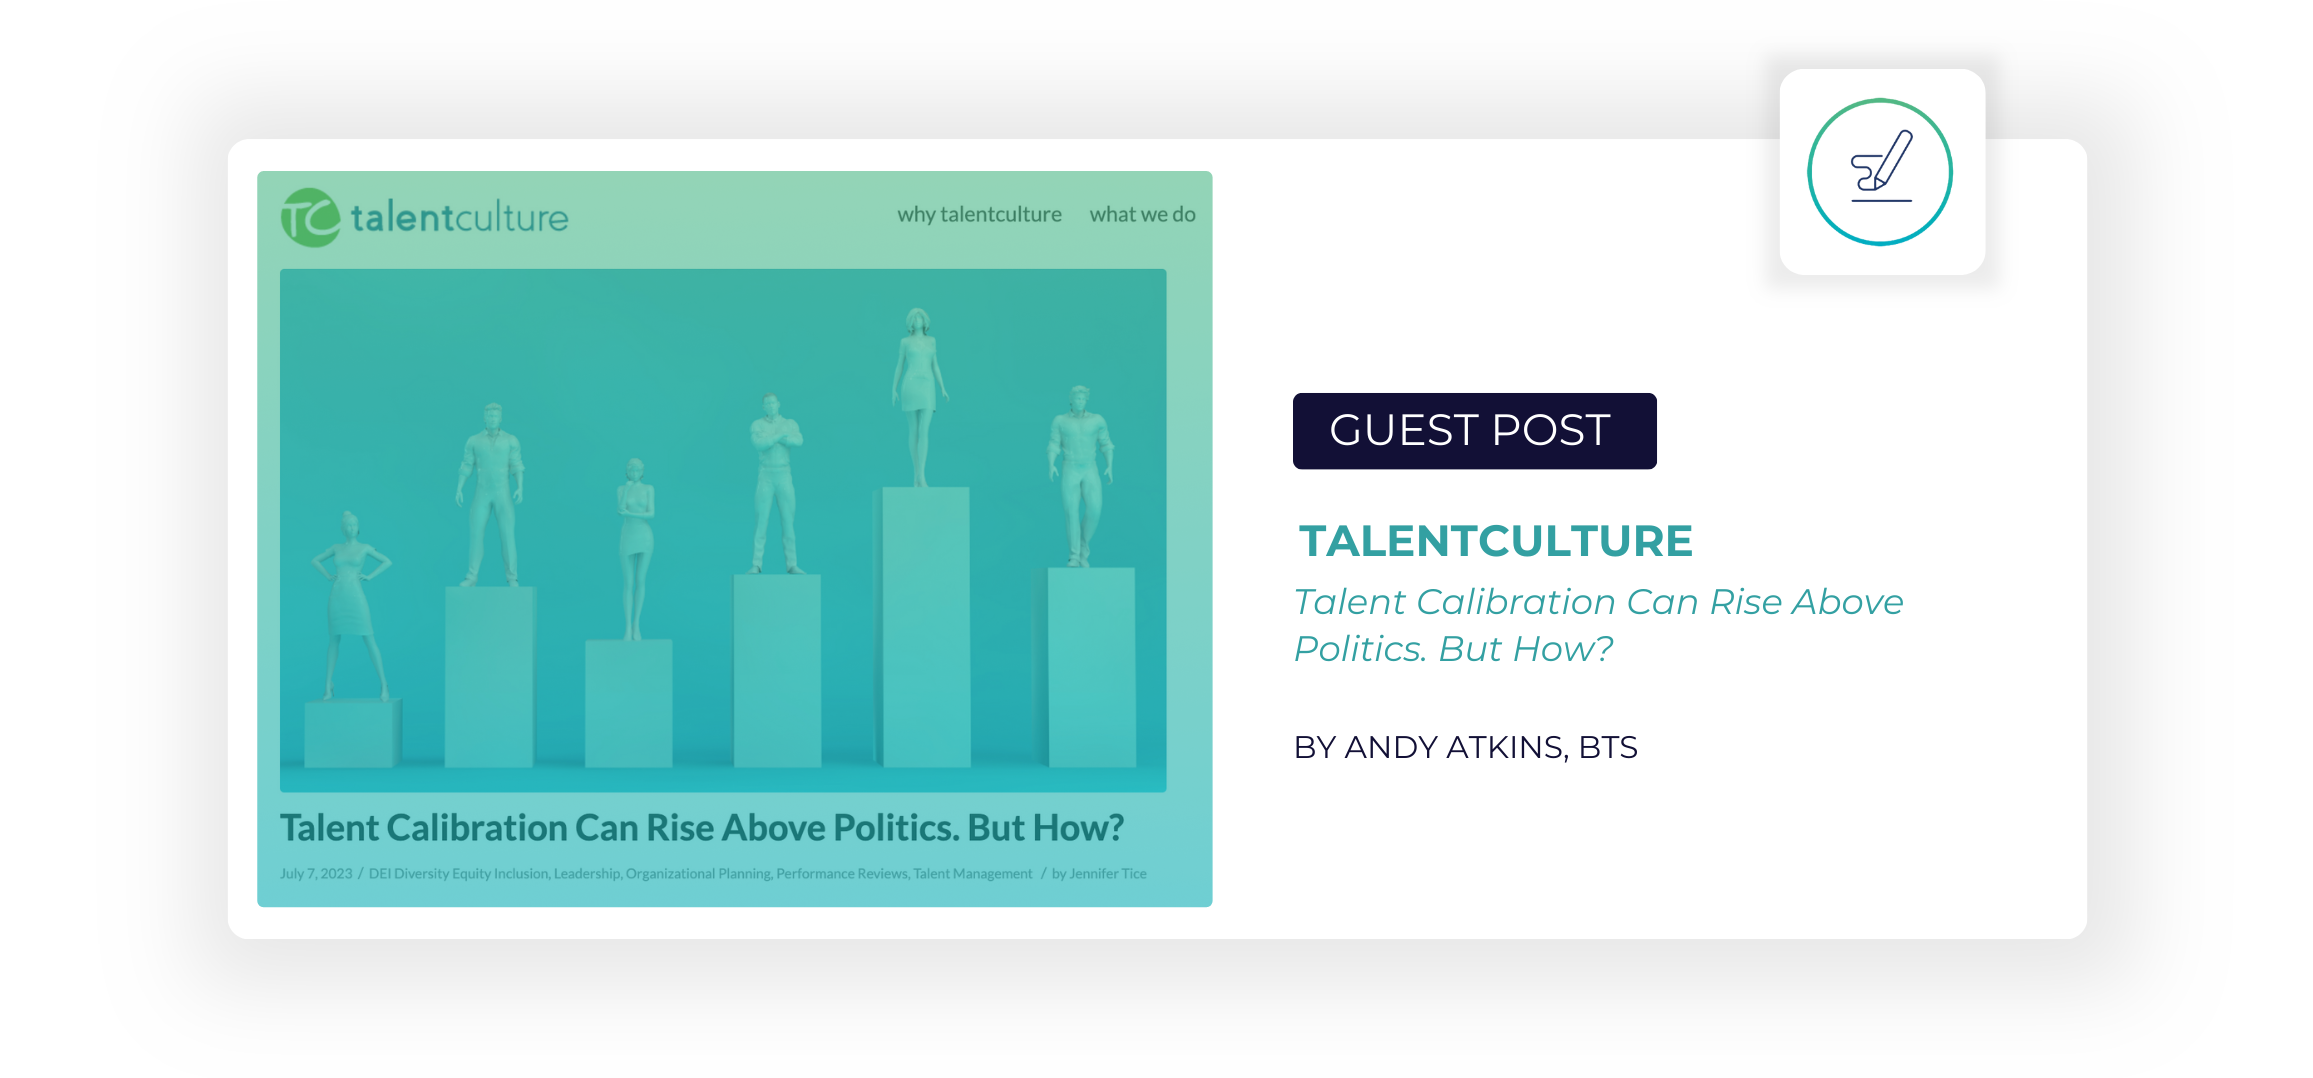 Guest post in TalentCulture by Andy Atkins of BTS: Talent Calibration Can Rise Above Politics. But How?